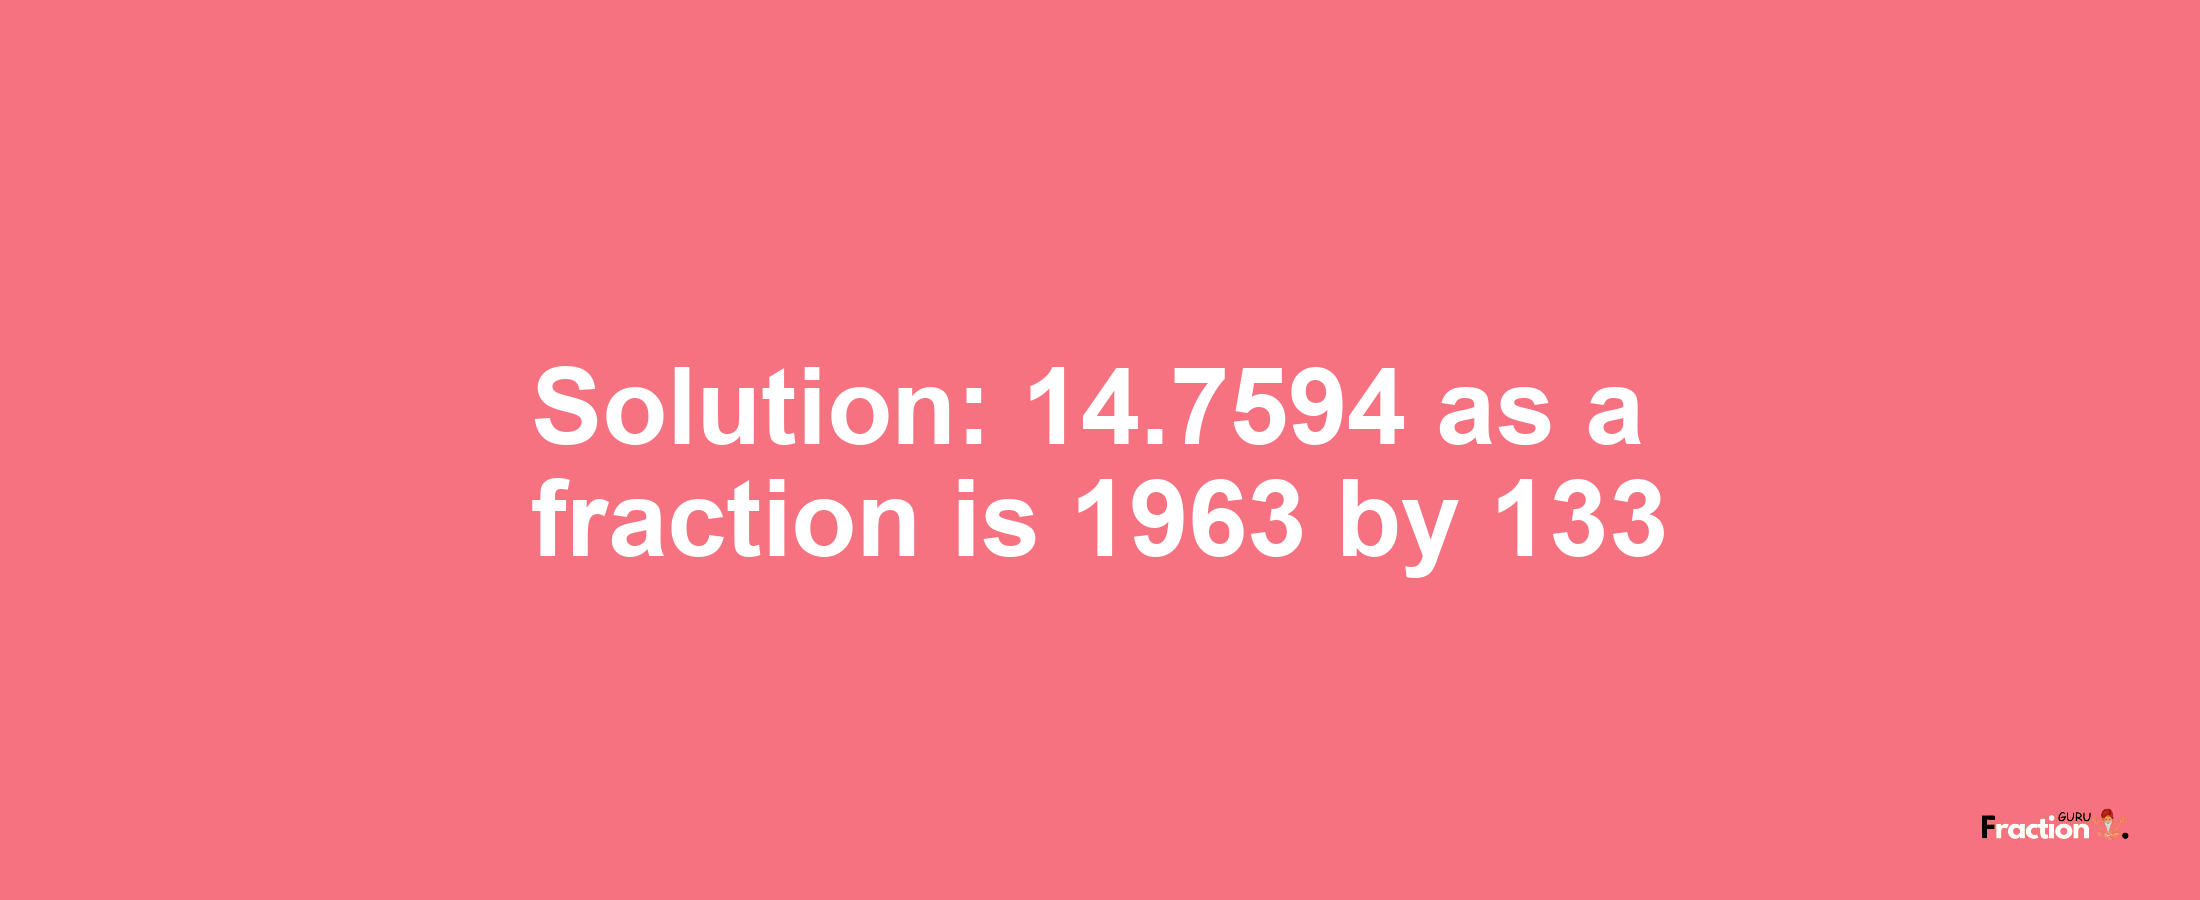 Solution:14.7594 as a fraction is 1963/133